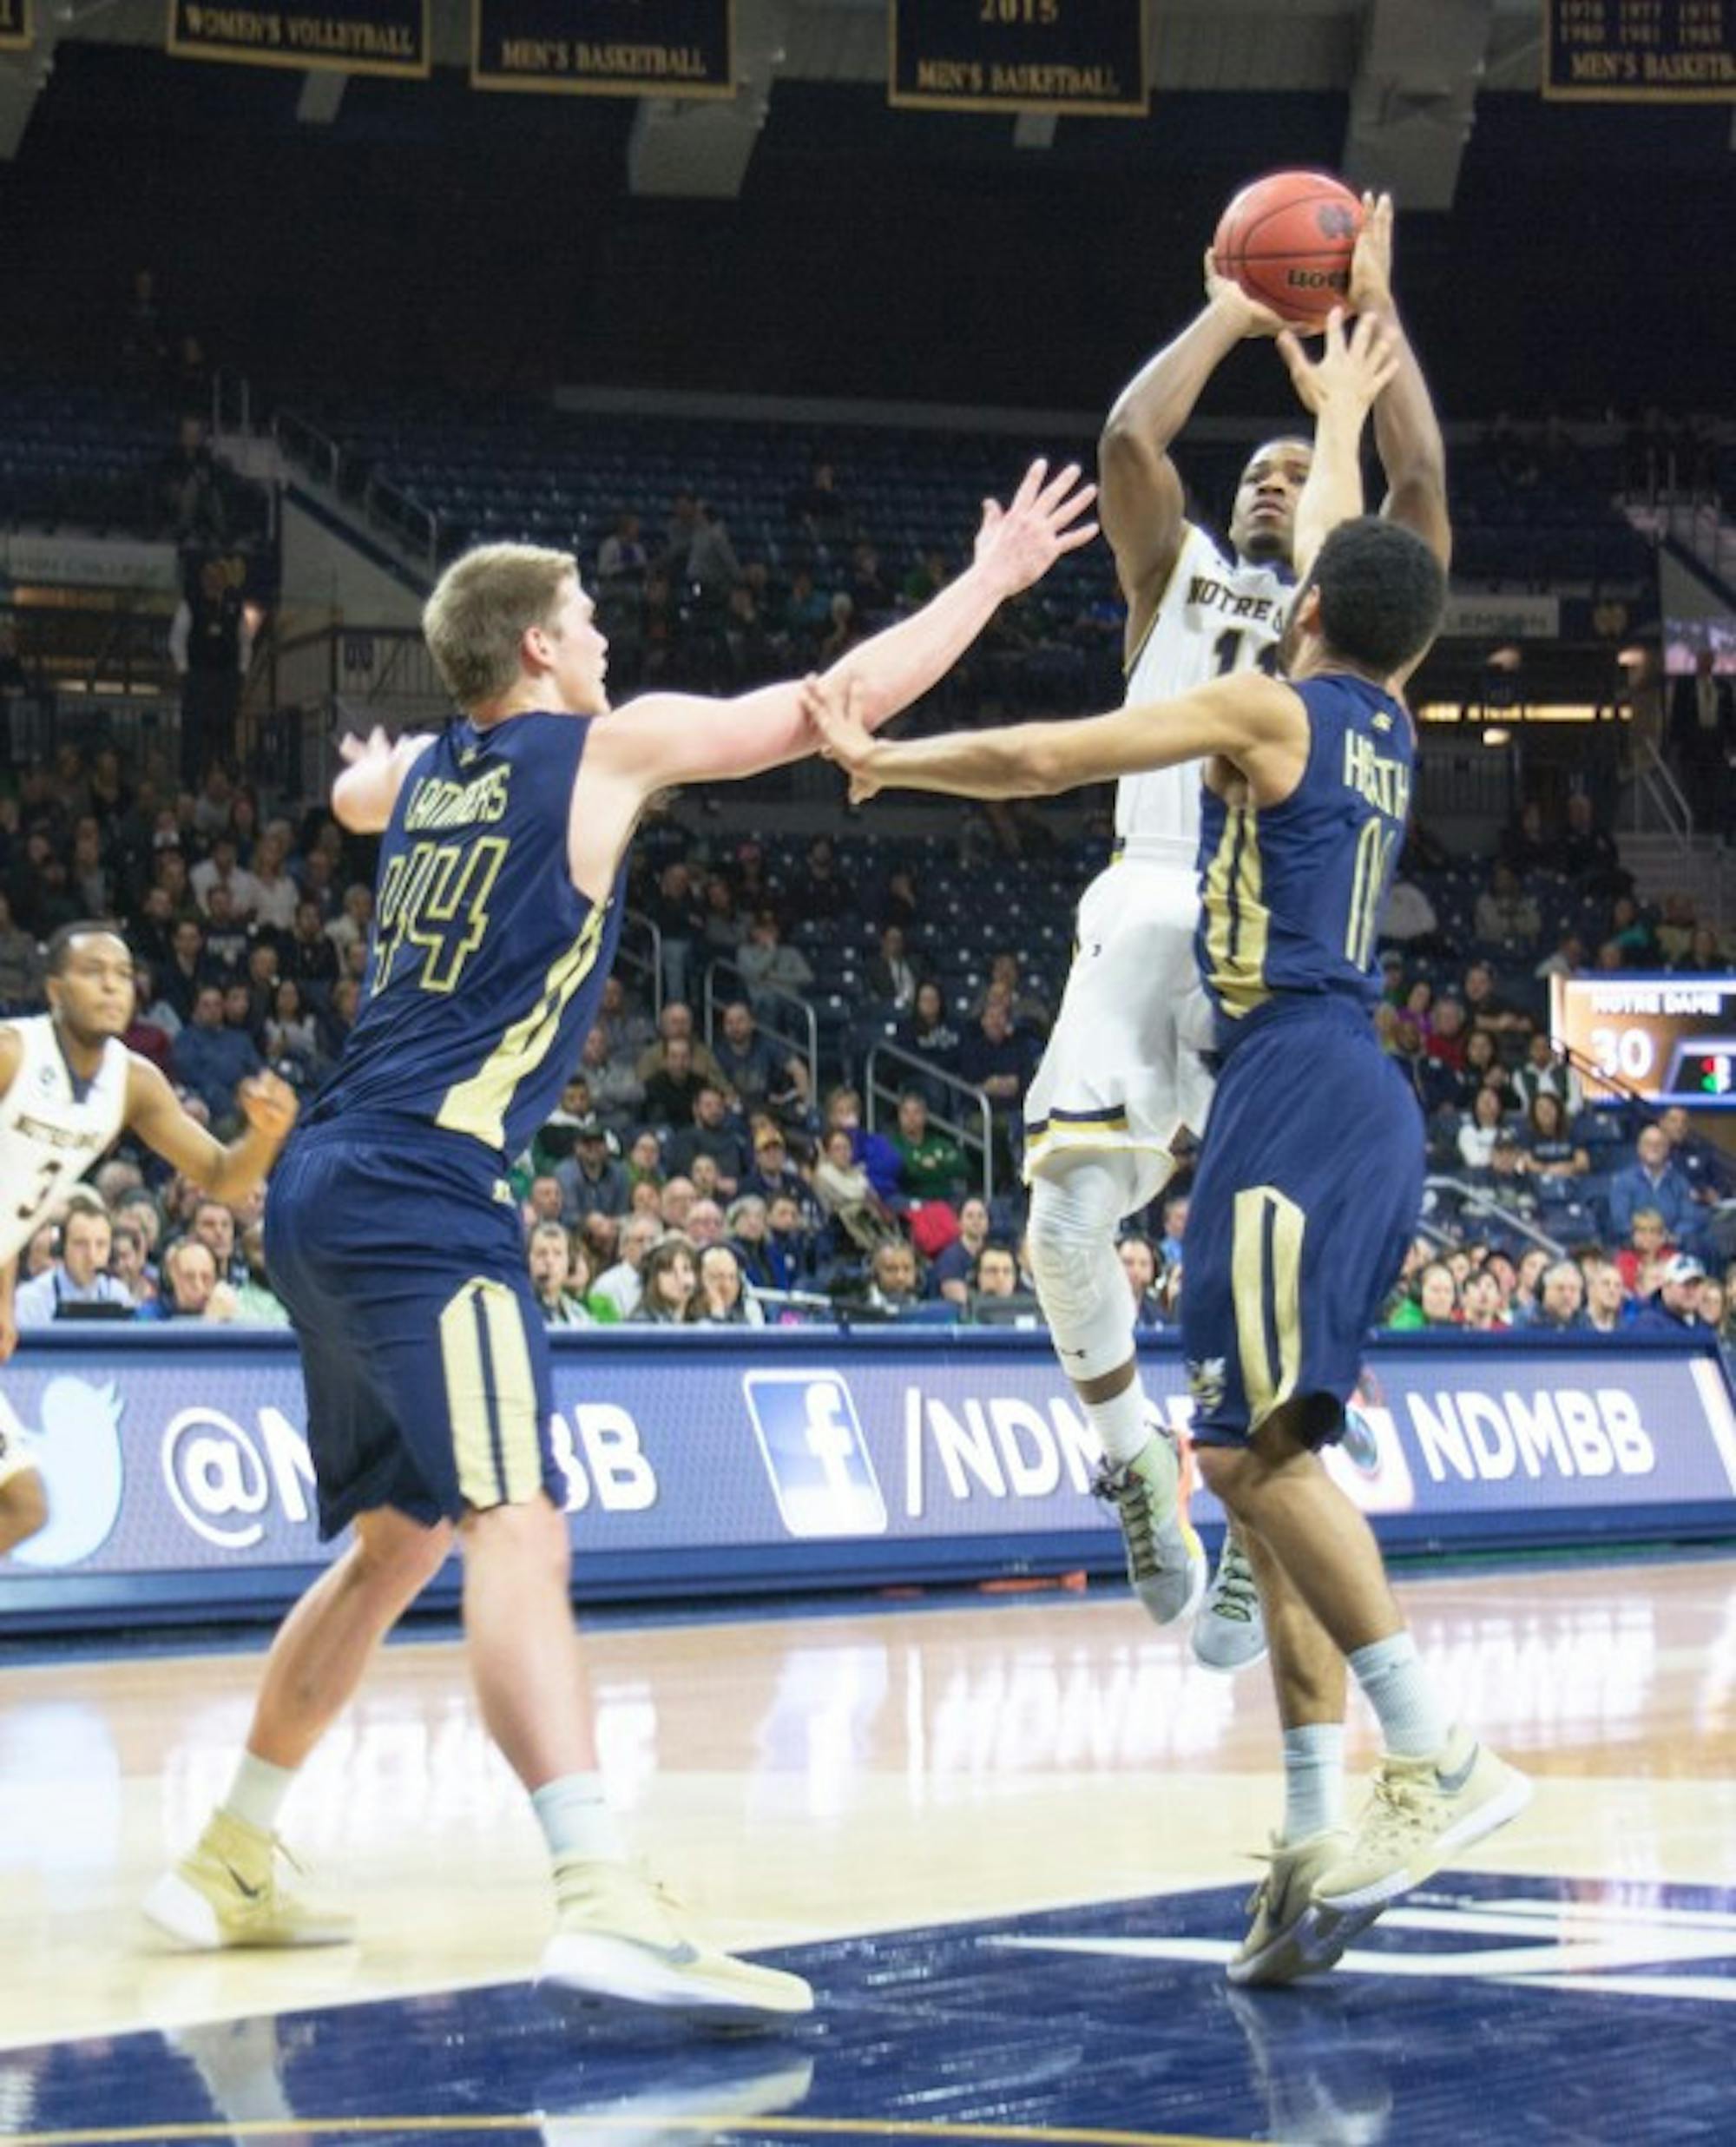 Irish junior guard Demetrius Jackson rises up over two Georgia Tech defenders during Notre Dame’s  72-64 win over the Yellow Jackets on Wednesday. Jackson scored 24 points against Duke on Saturday.